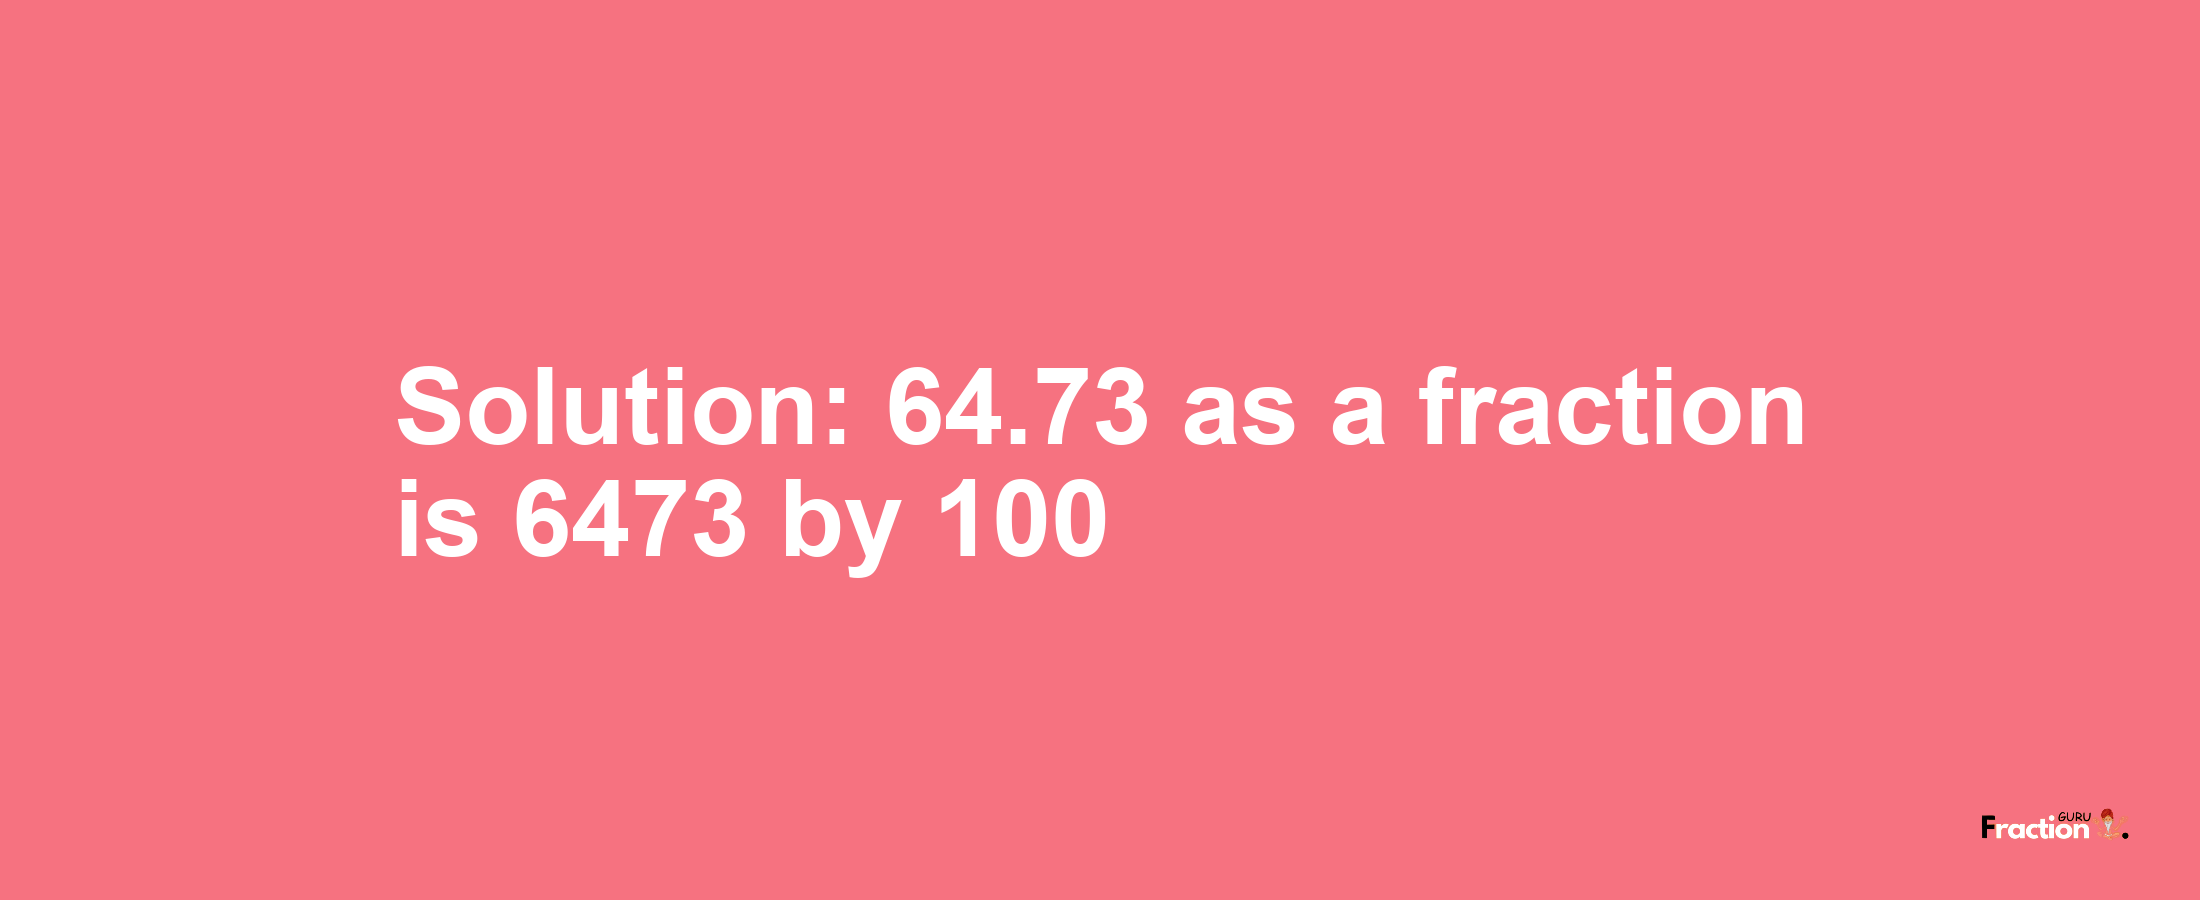 Solution:64.73 as a fraction is 6473/100